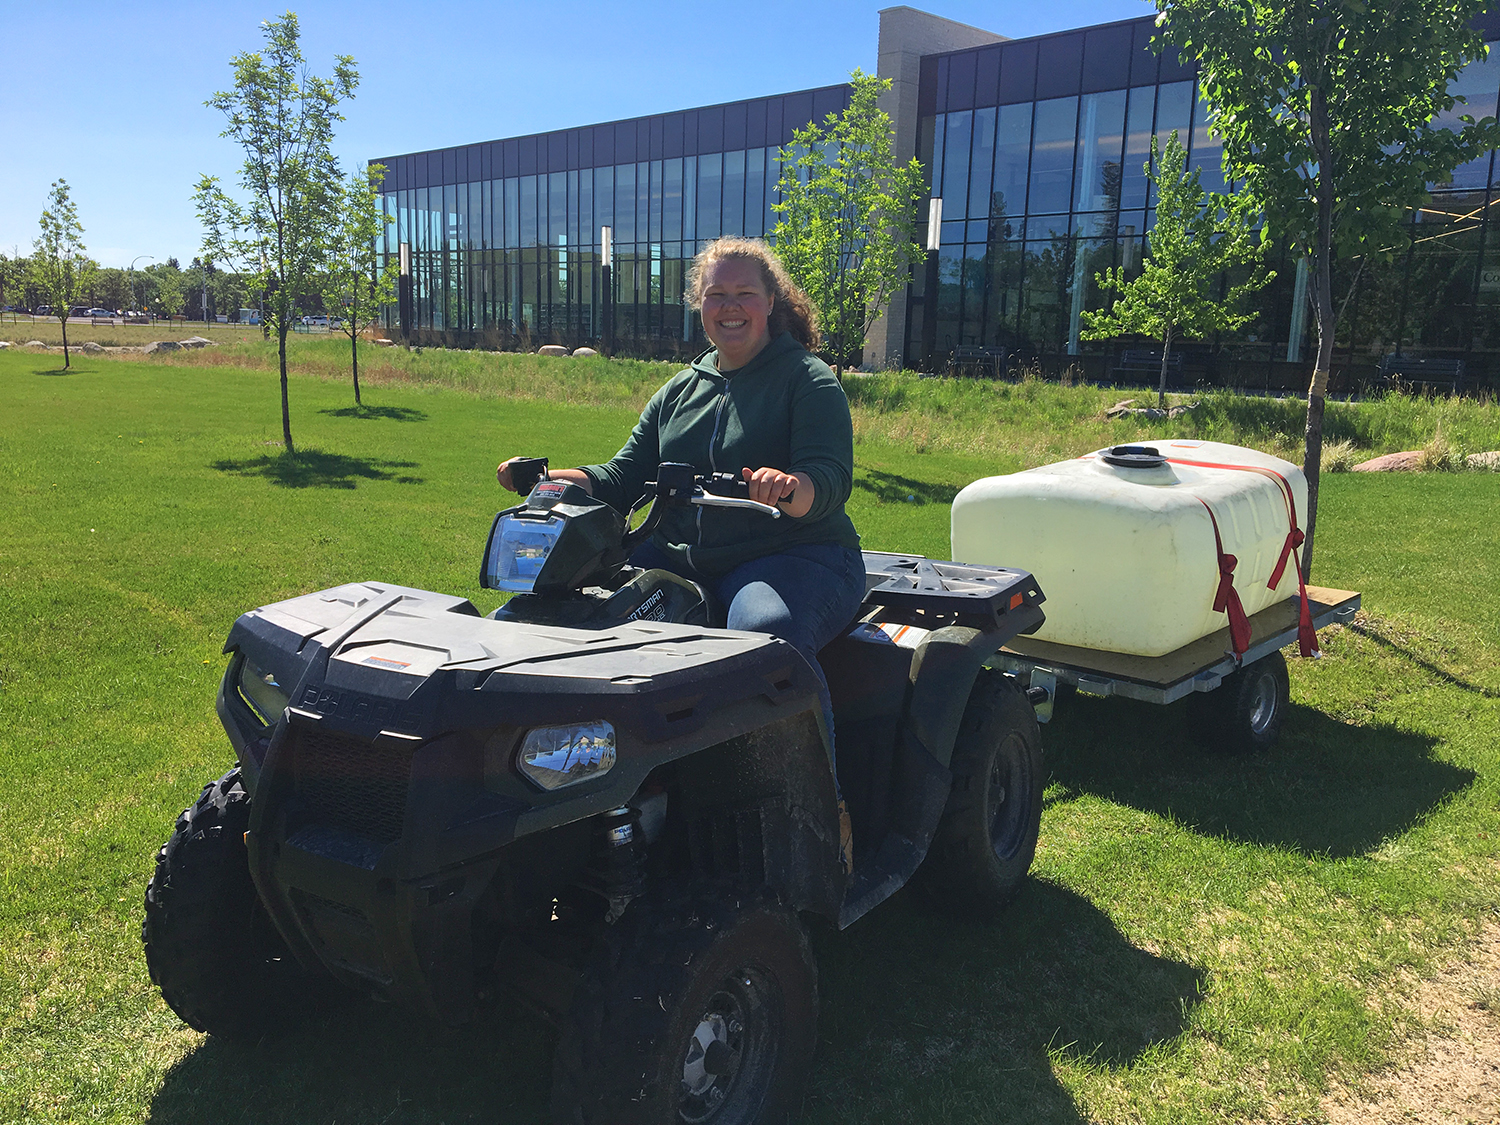 Summer jobs: On-campus employment at CMU. Rebecca Janzen rides 'the quad' for her summer job as a groundskeeper at CMU.